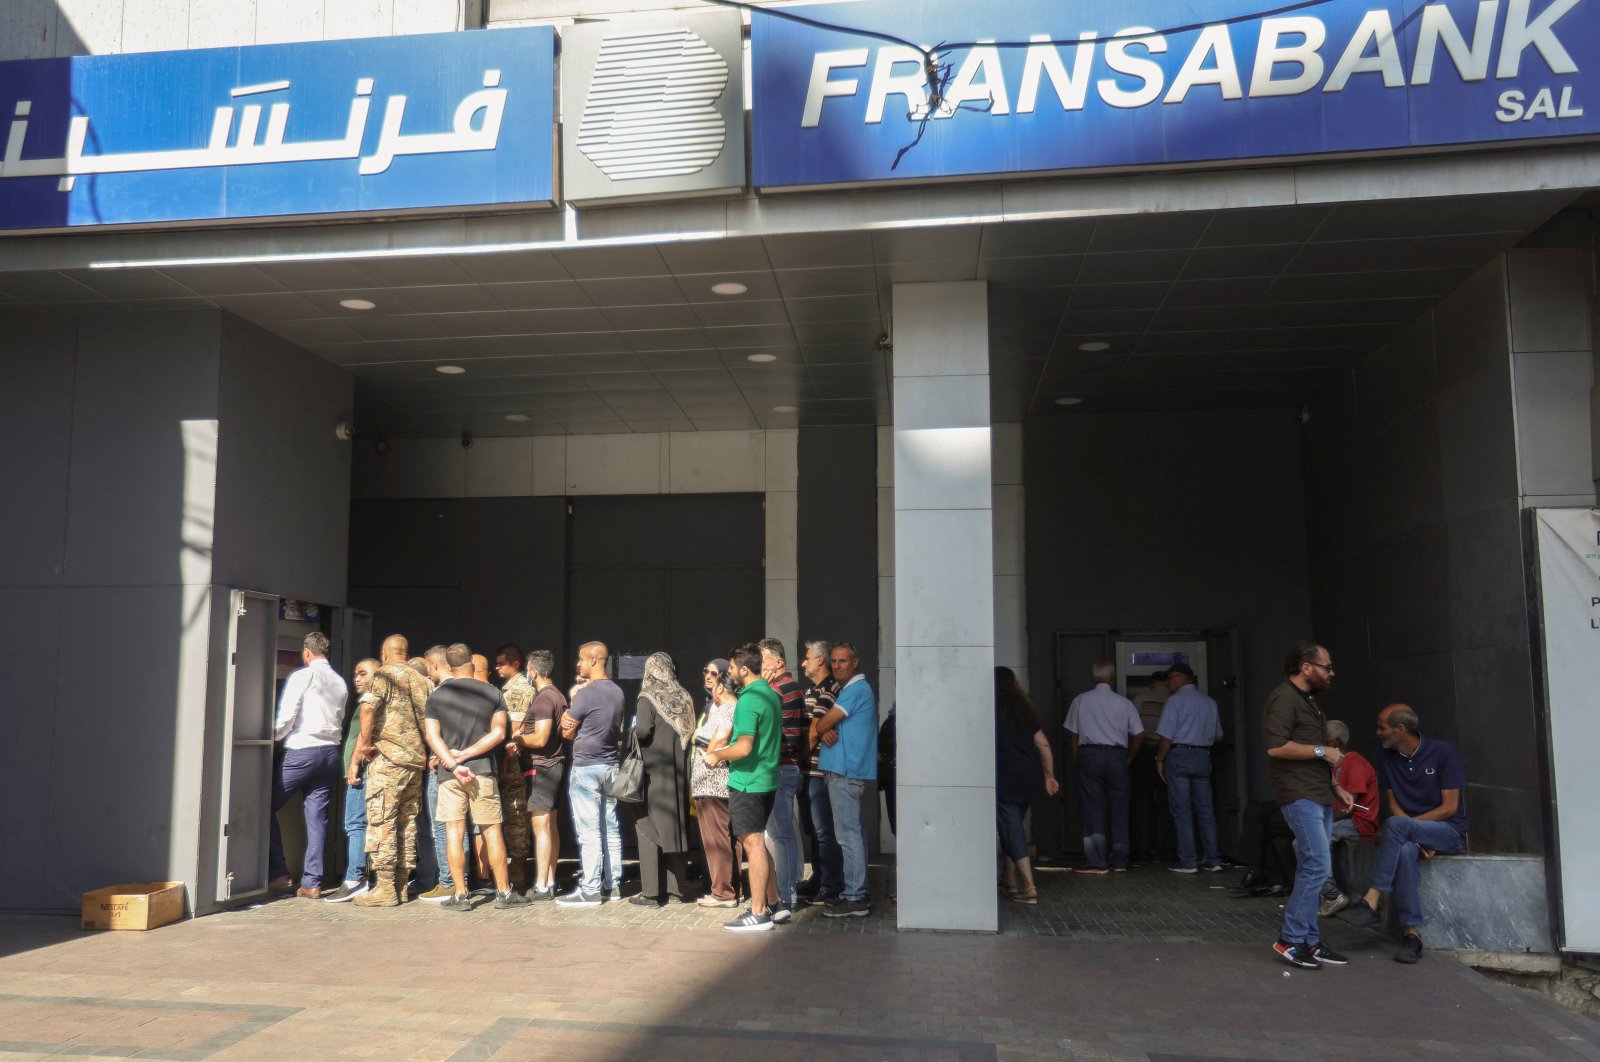 People queue as they wait to withdraw money from ATM cash machines in Sidon, Lebanon, Sept. 26, 2022. (Reuters Photo)